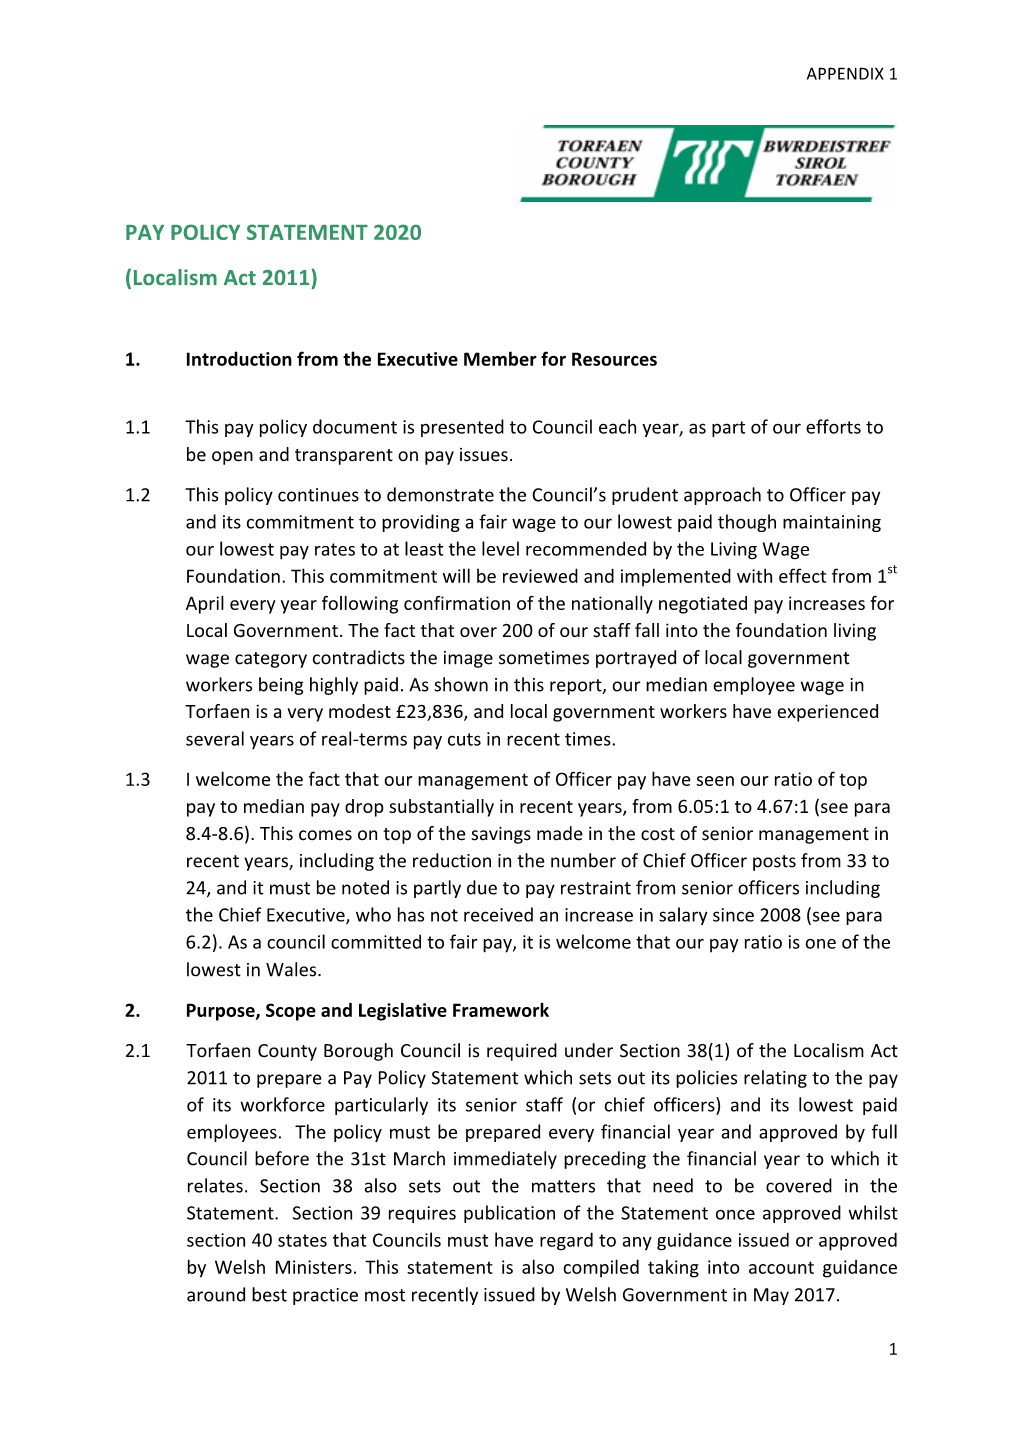 PAY POLICY STATEMENT 2020 (Localism Act 2011)